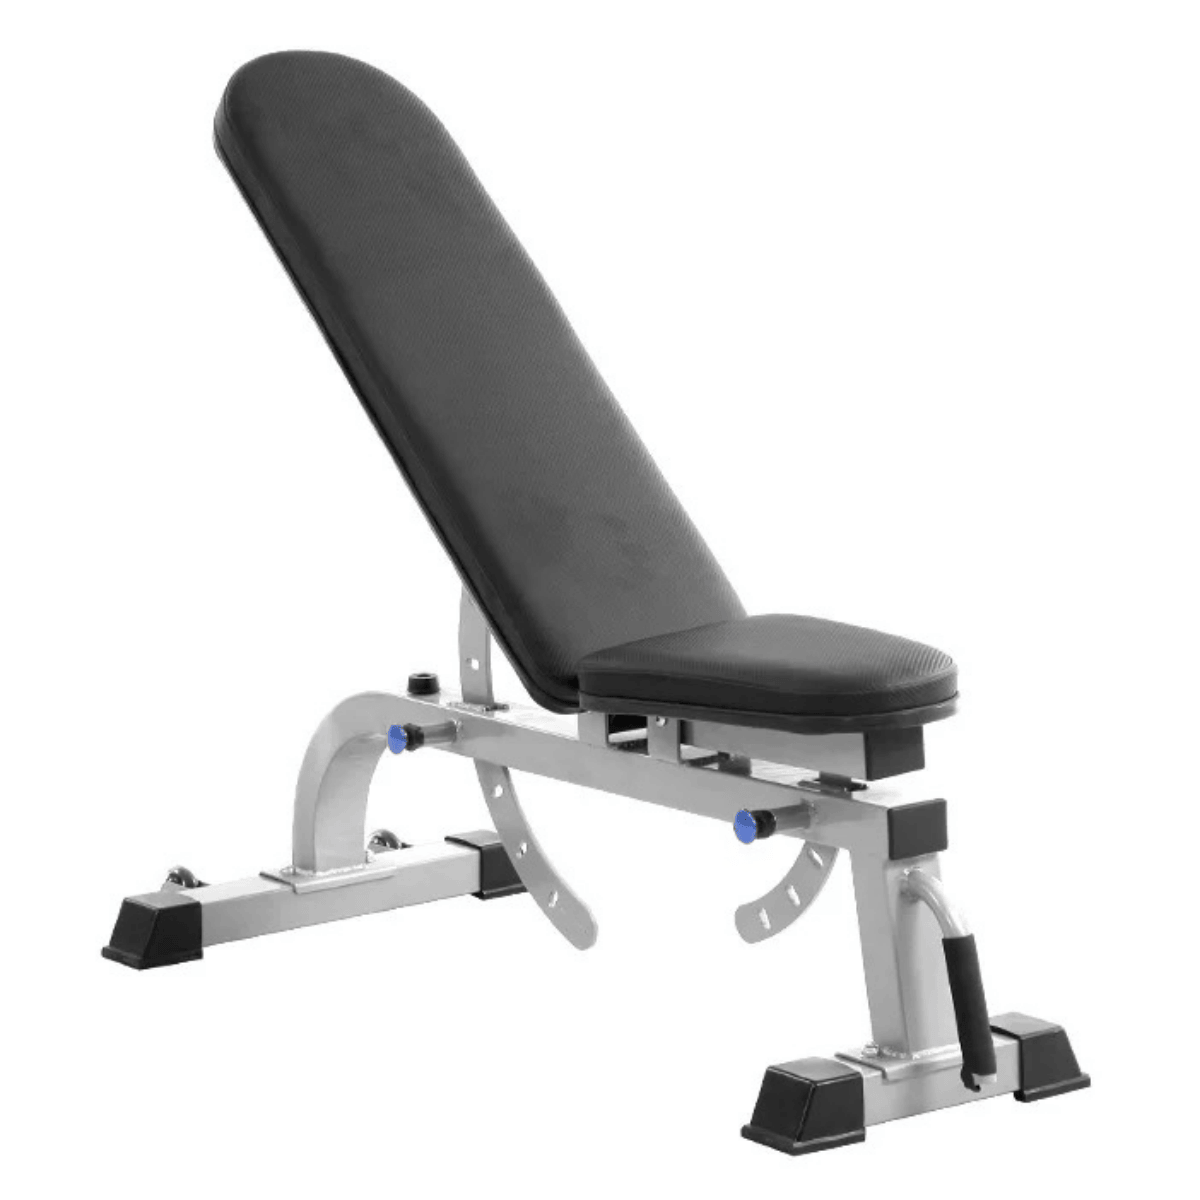 Abs Tower 20 in1 gym bench with 50kg steel gym equipments for home